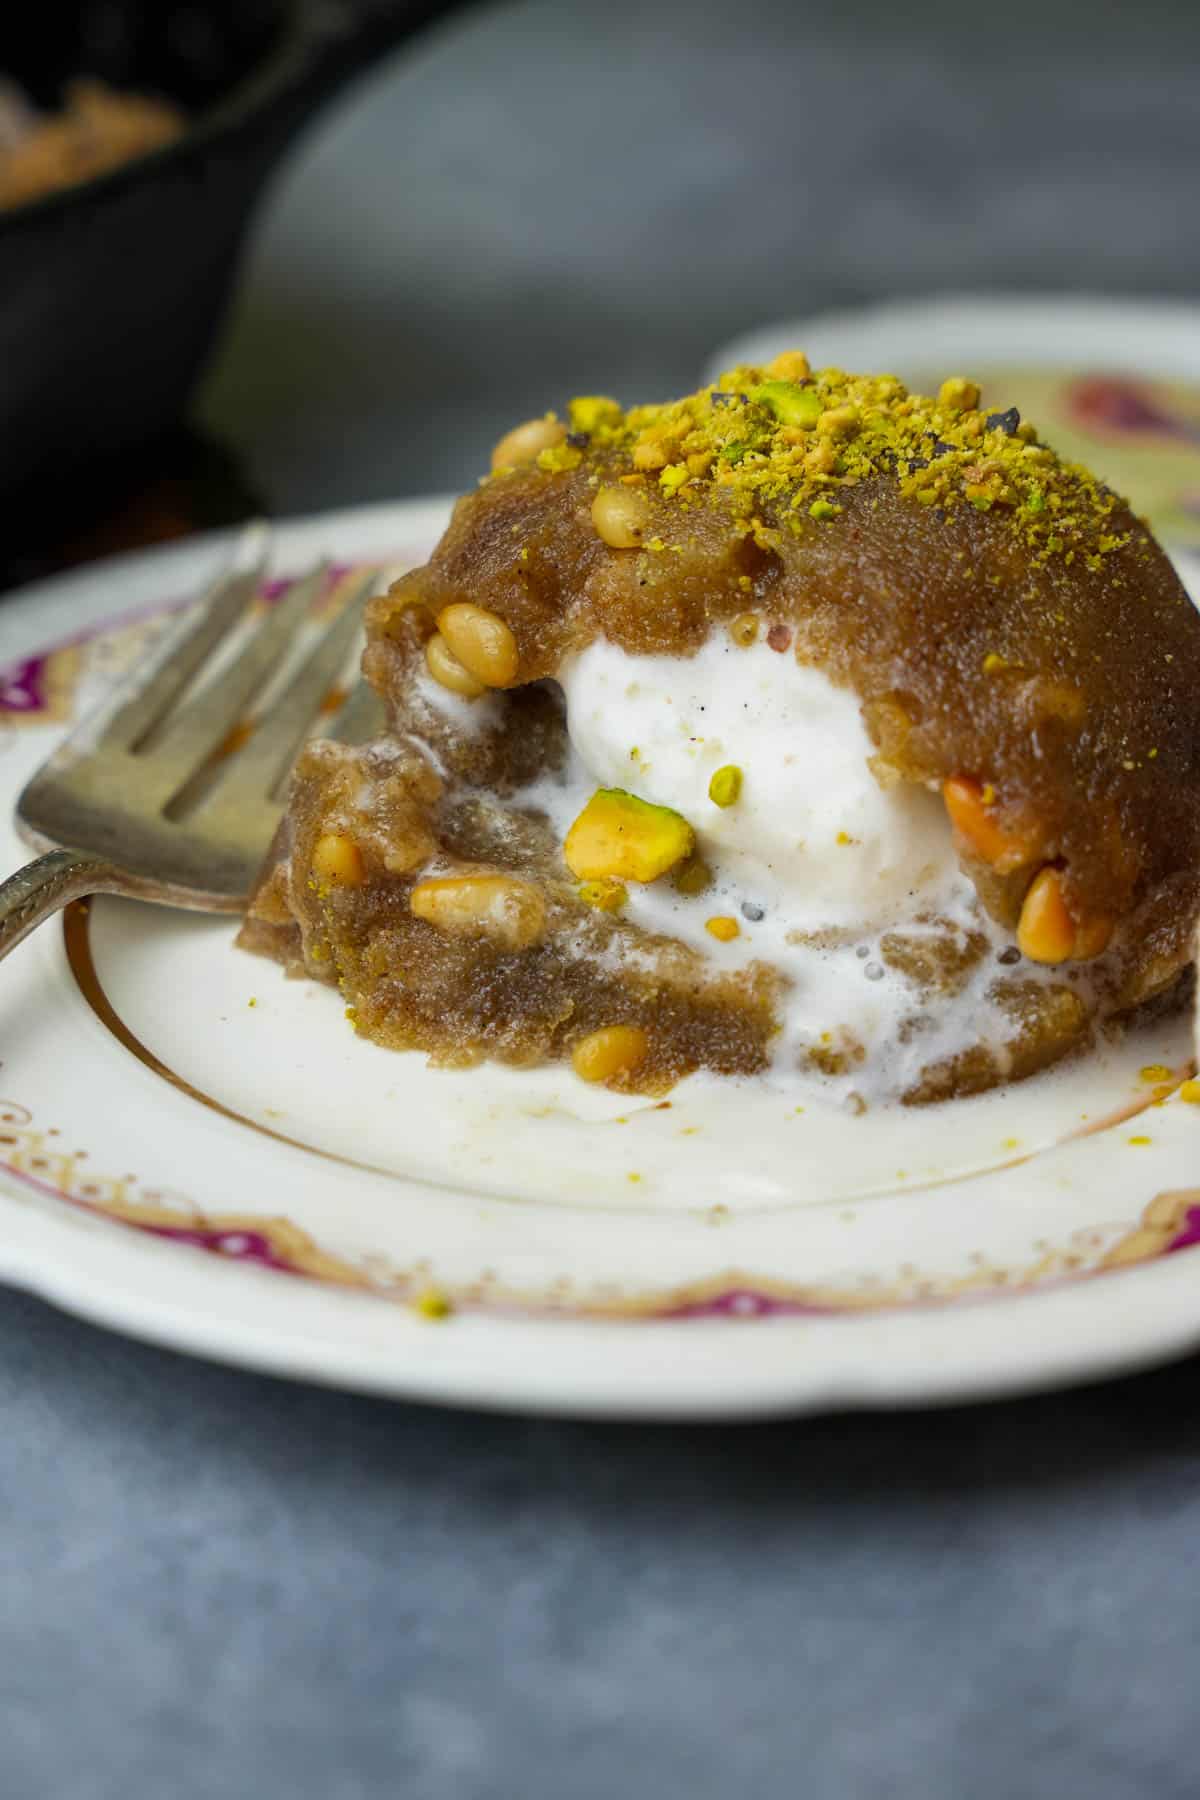 A molded mound of vanilla ice cream filled Irmik helvasi garnished with pistachios on a decorative ceramic plate.